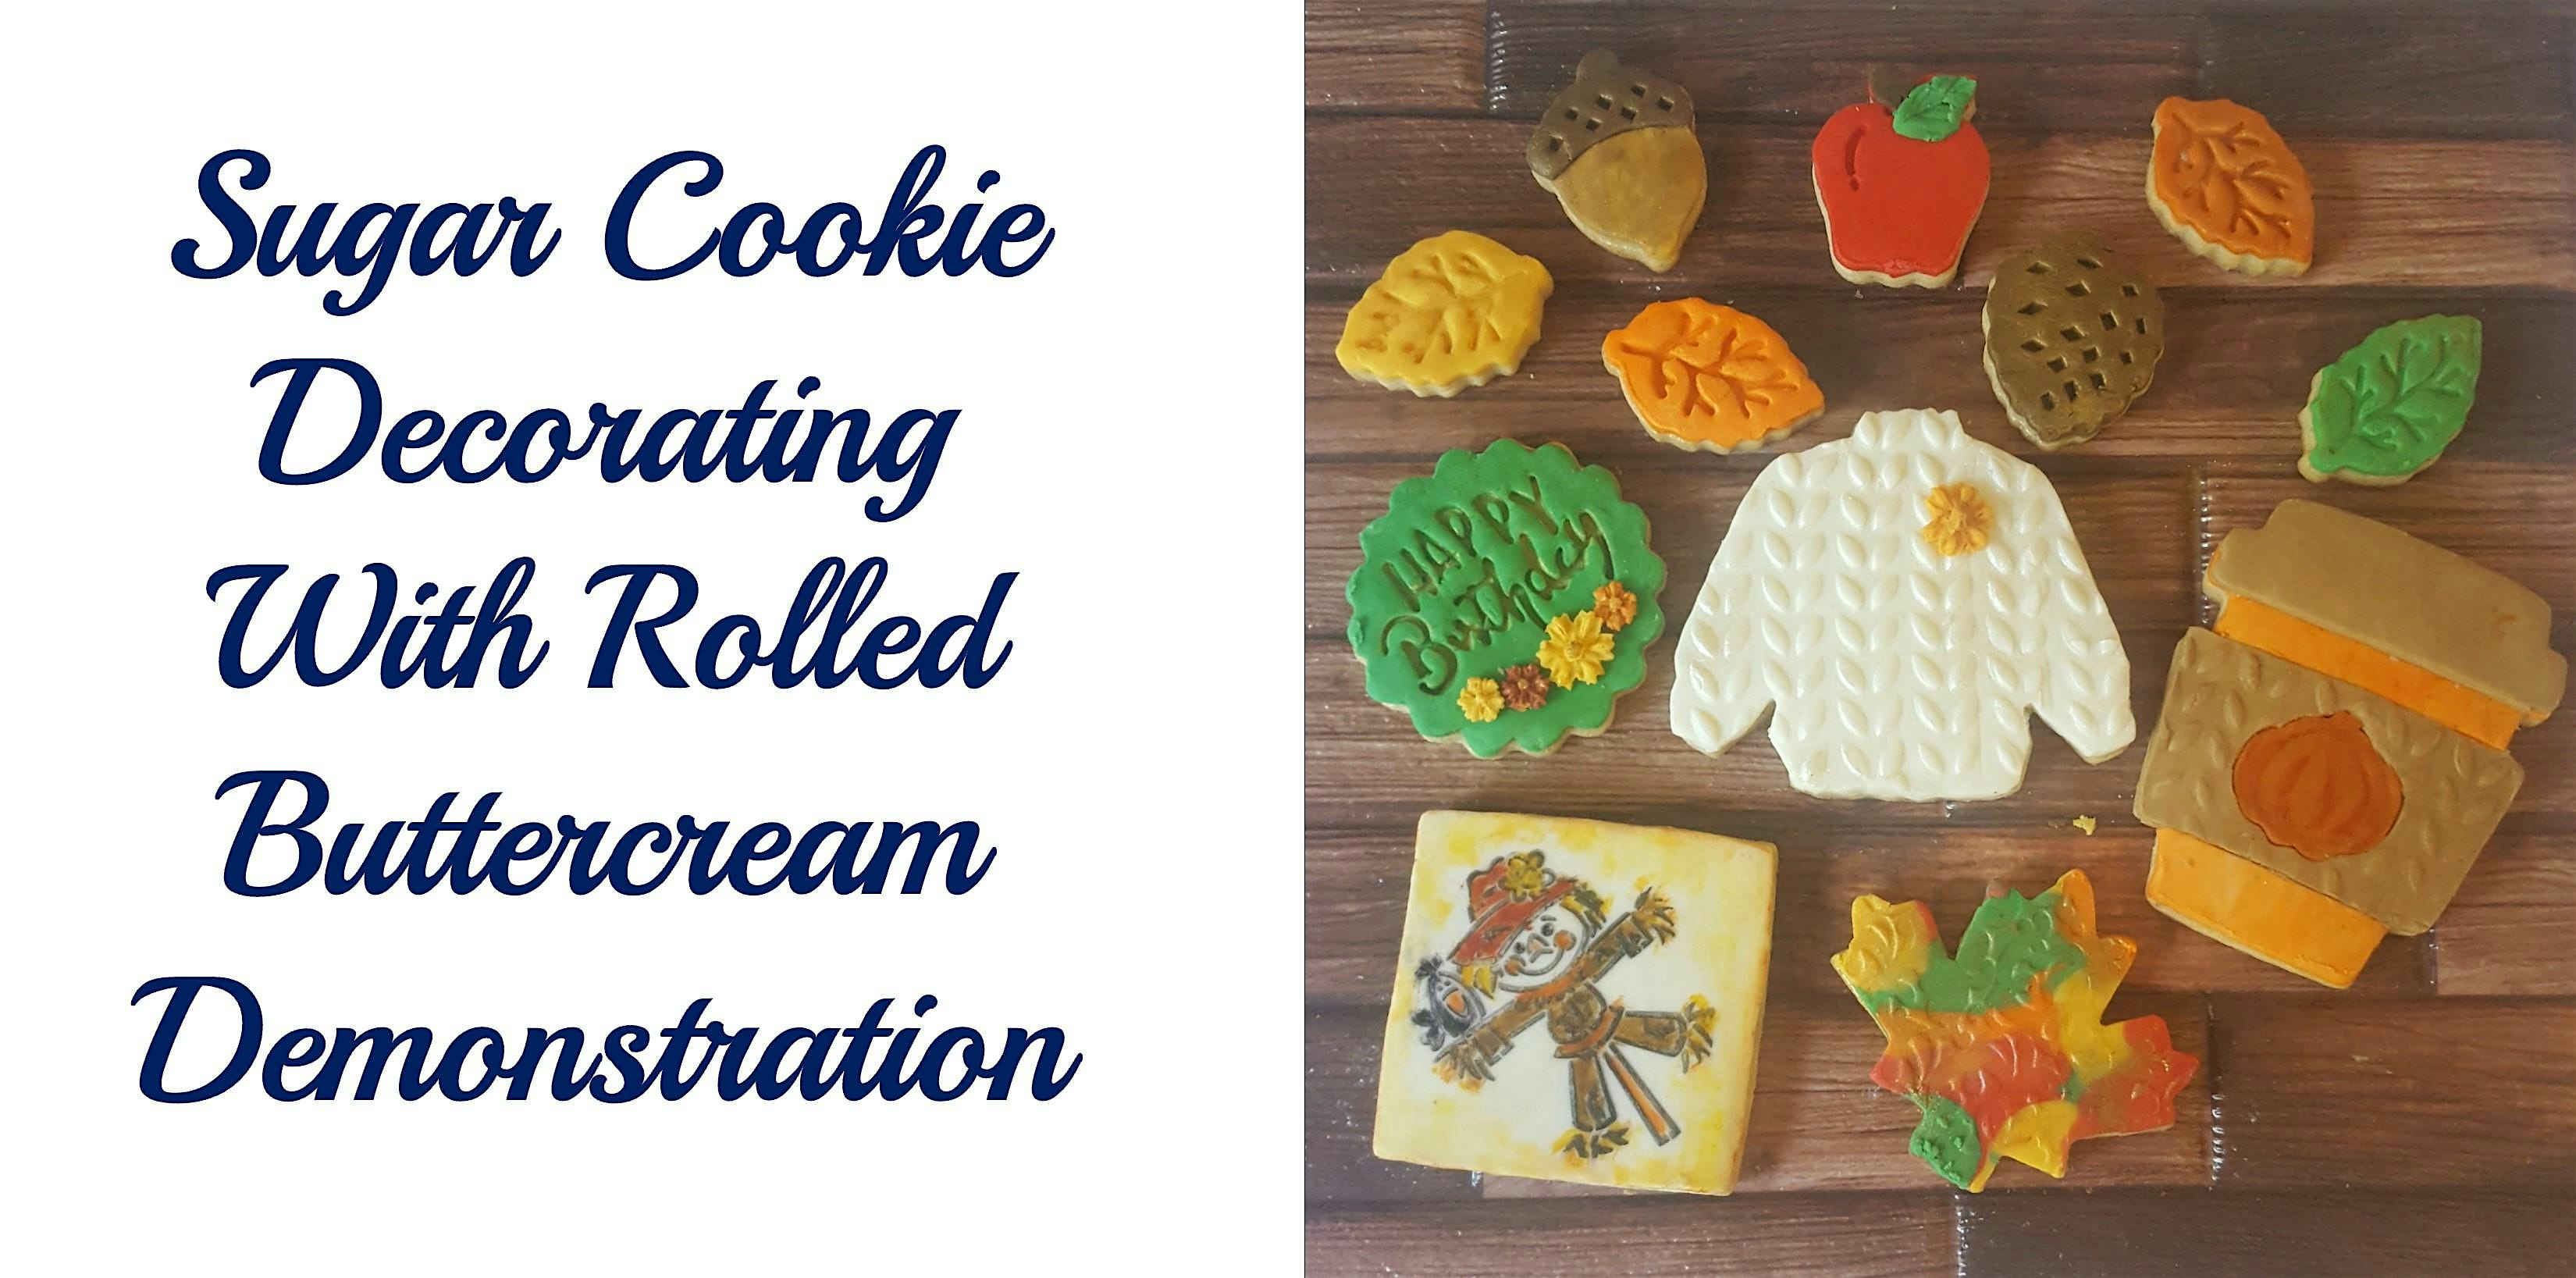 Decorate Sugar Cookies with Rolled Buttercream Demonstration